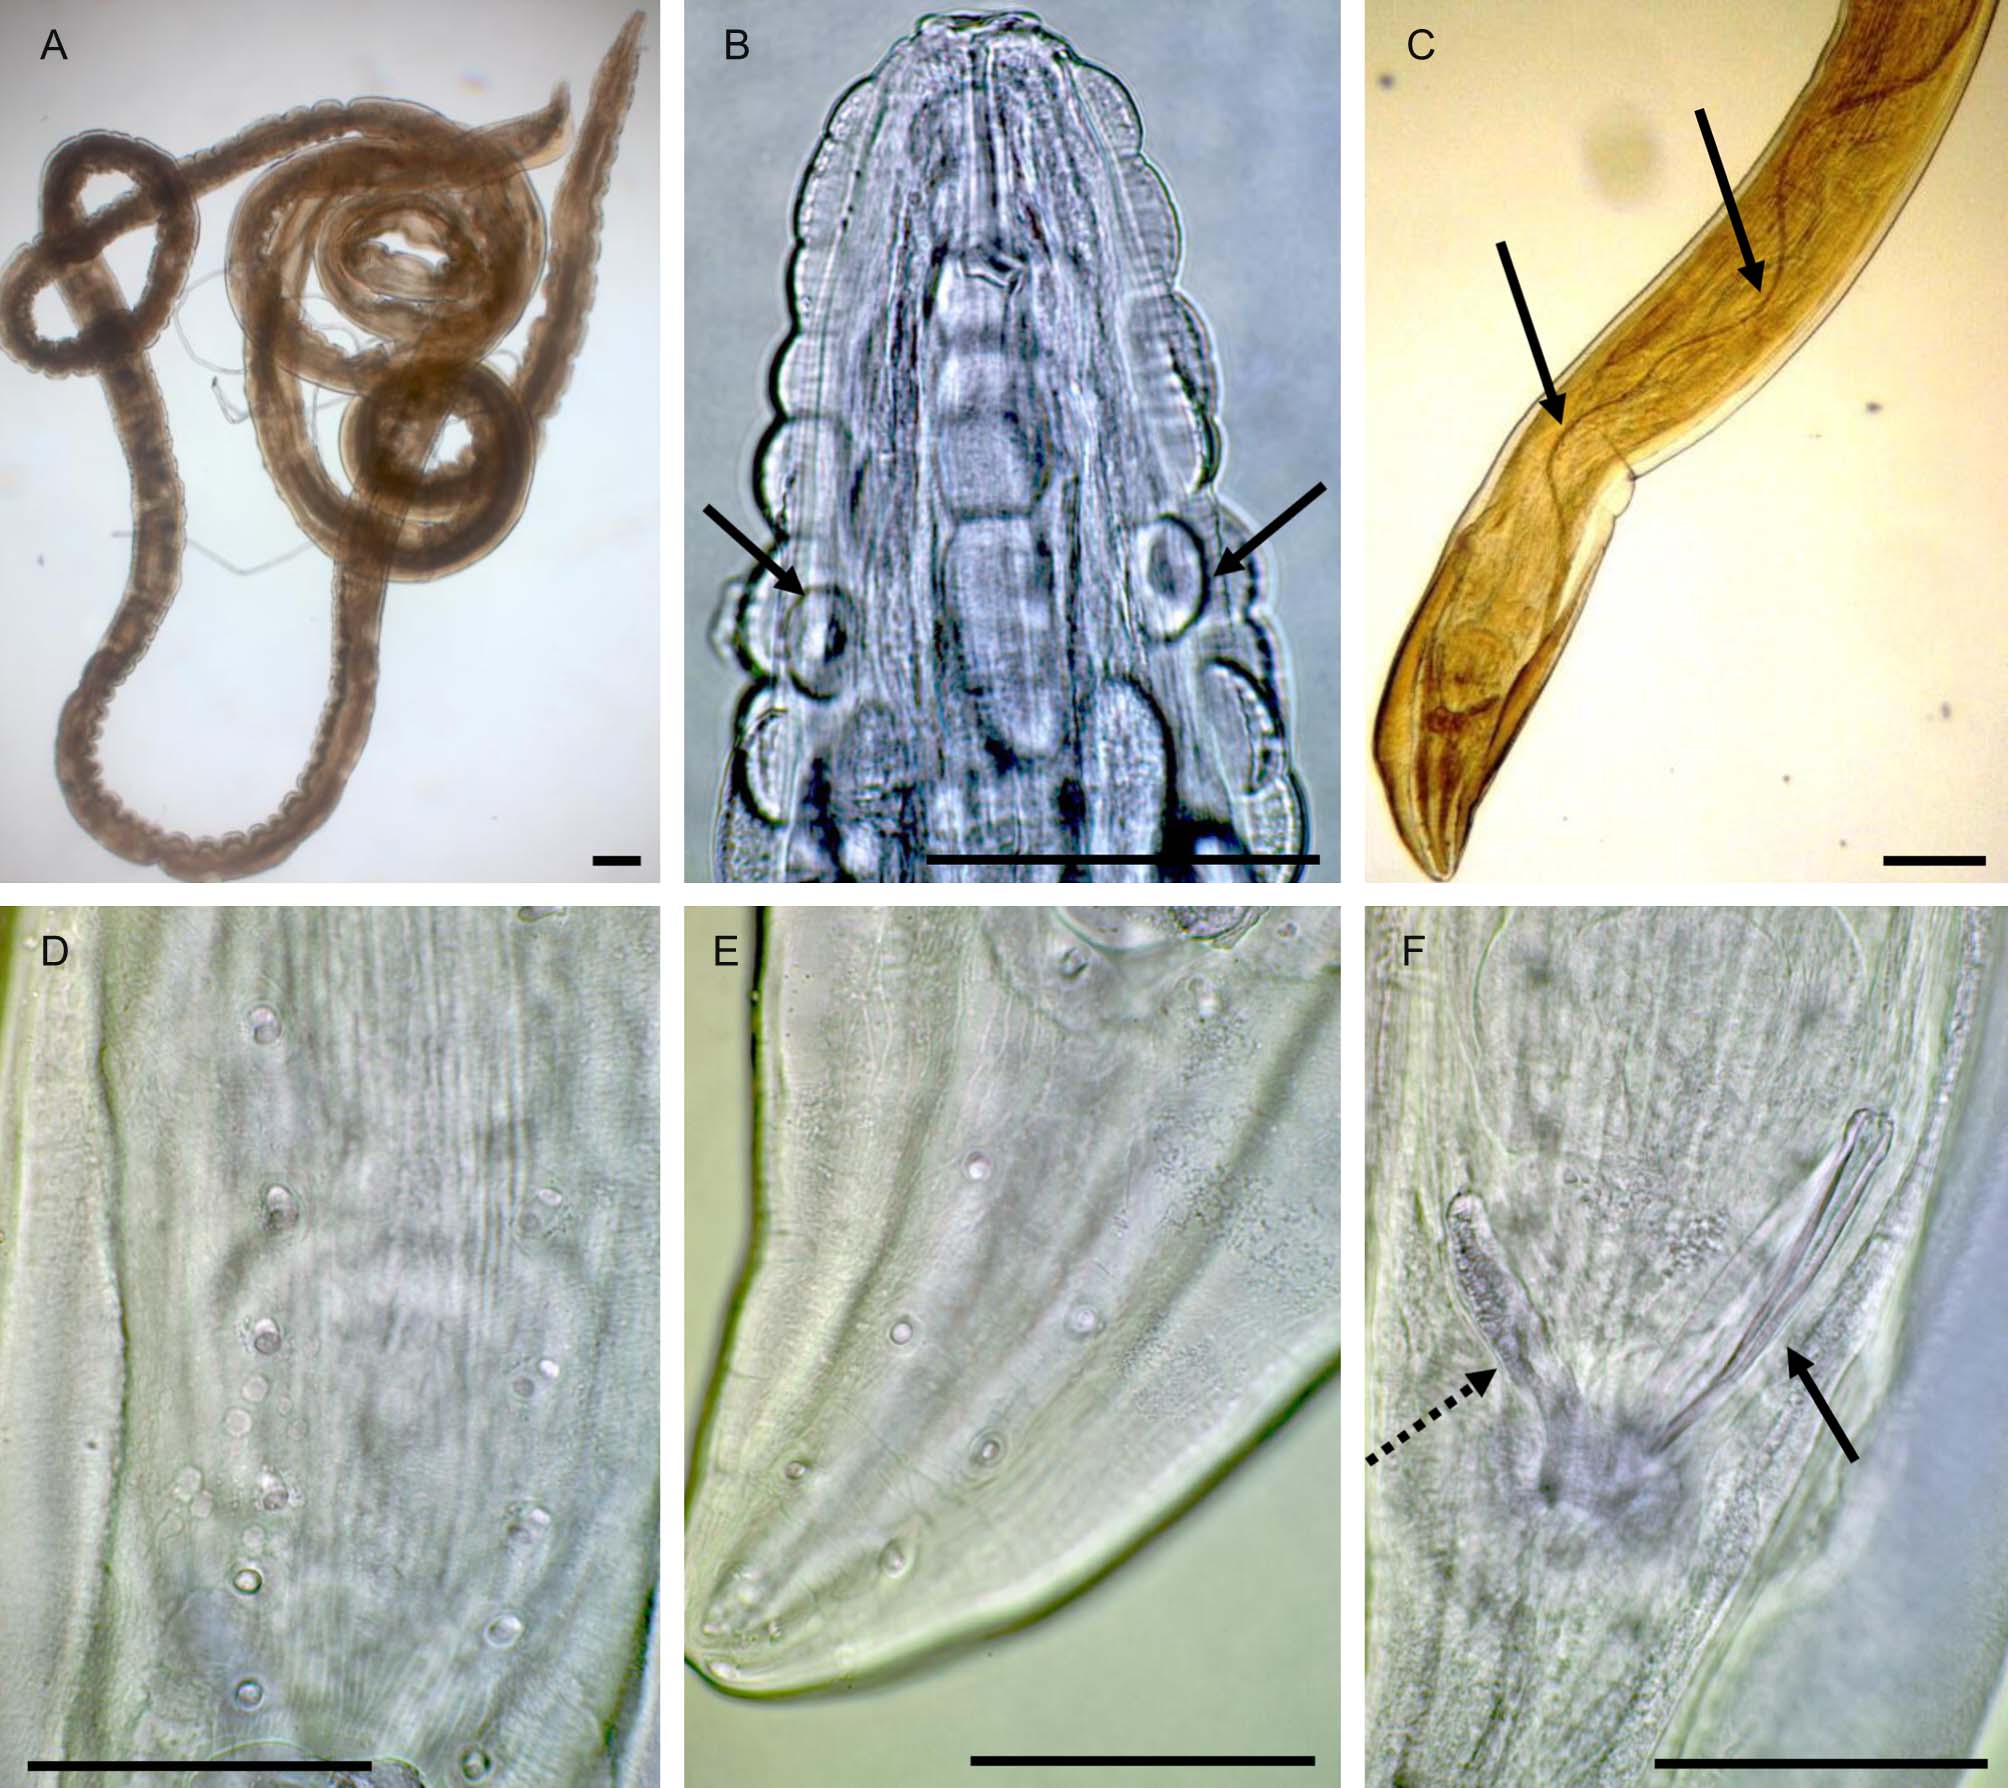 Gongylonema pulchrum (Nematoda), male. Bars: 100 μm. A – entire male. B – cuticular bosses and deirids (arrows). C – posterior end and left spicule (arrows). D – precloacal papillae. E – postcloacal papillae. F – posterior end: right spicule (arrow) and g